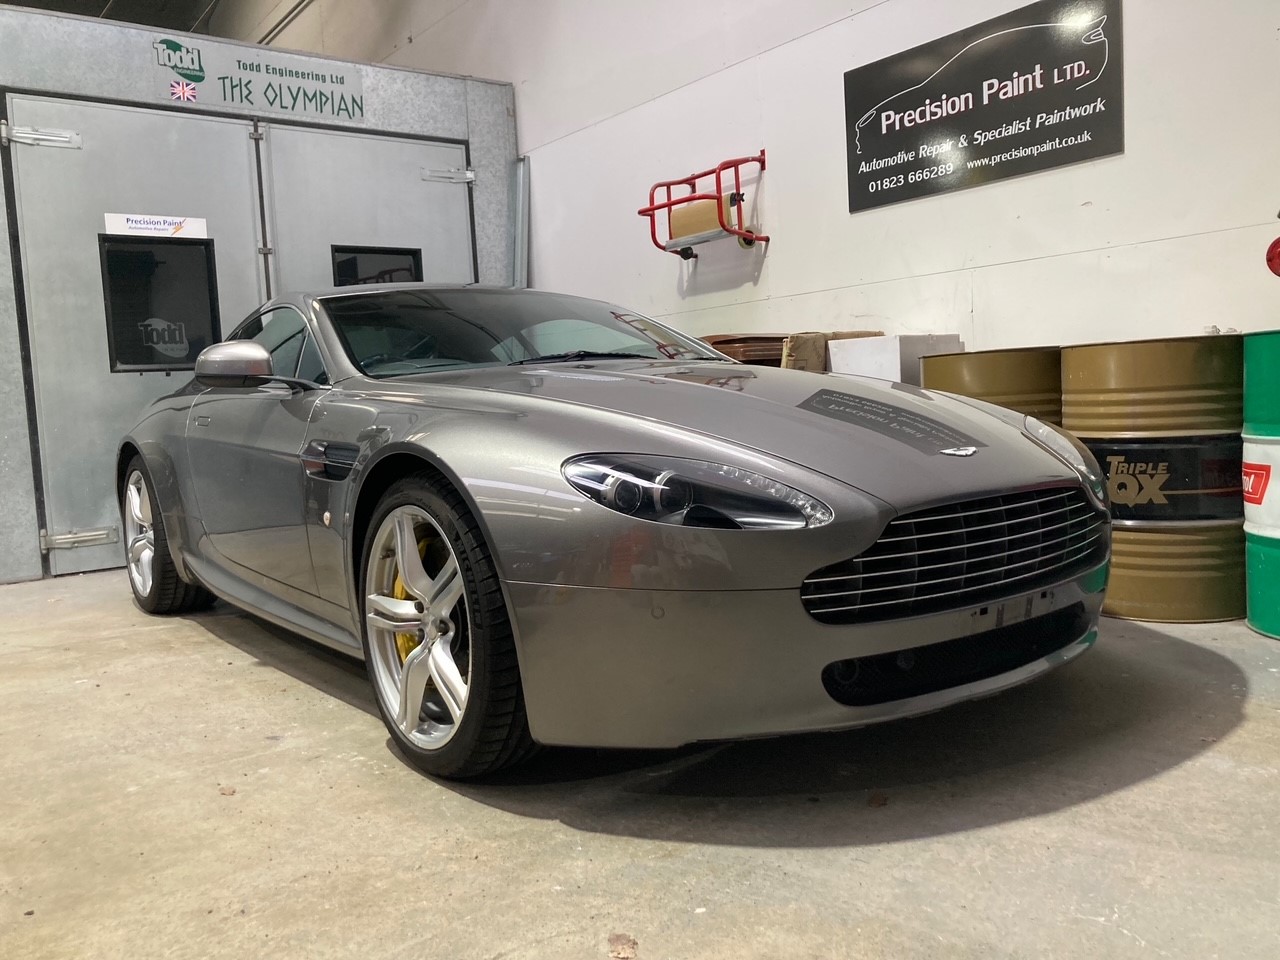 Aston Martin V8 Vantage - Given new lease of life by Precision Paint, Wellington